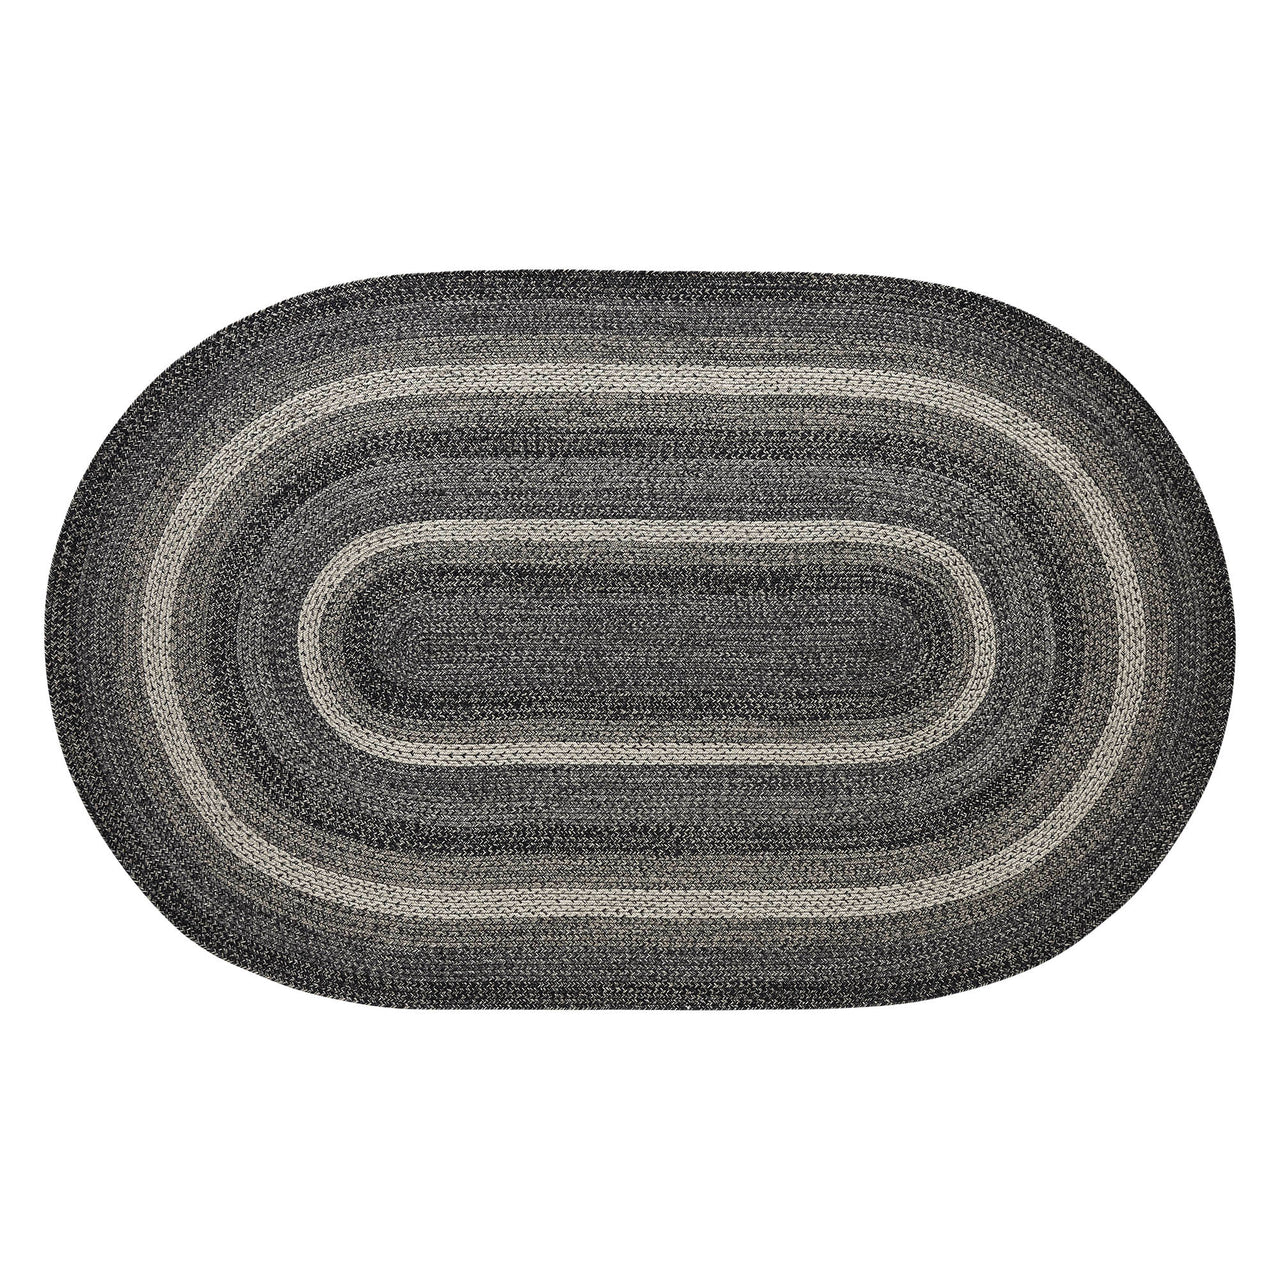 Sawyer Mill Black White Jute Braided Oval Rug with Rug Pad 5x8' VHC Brands